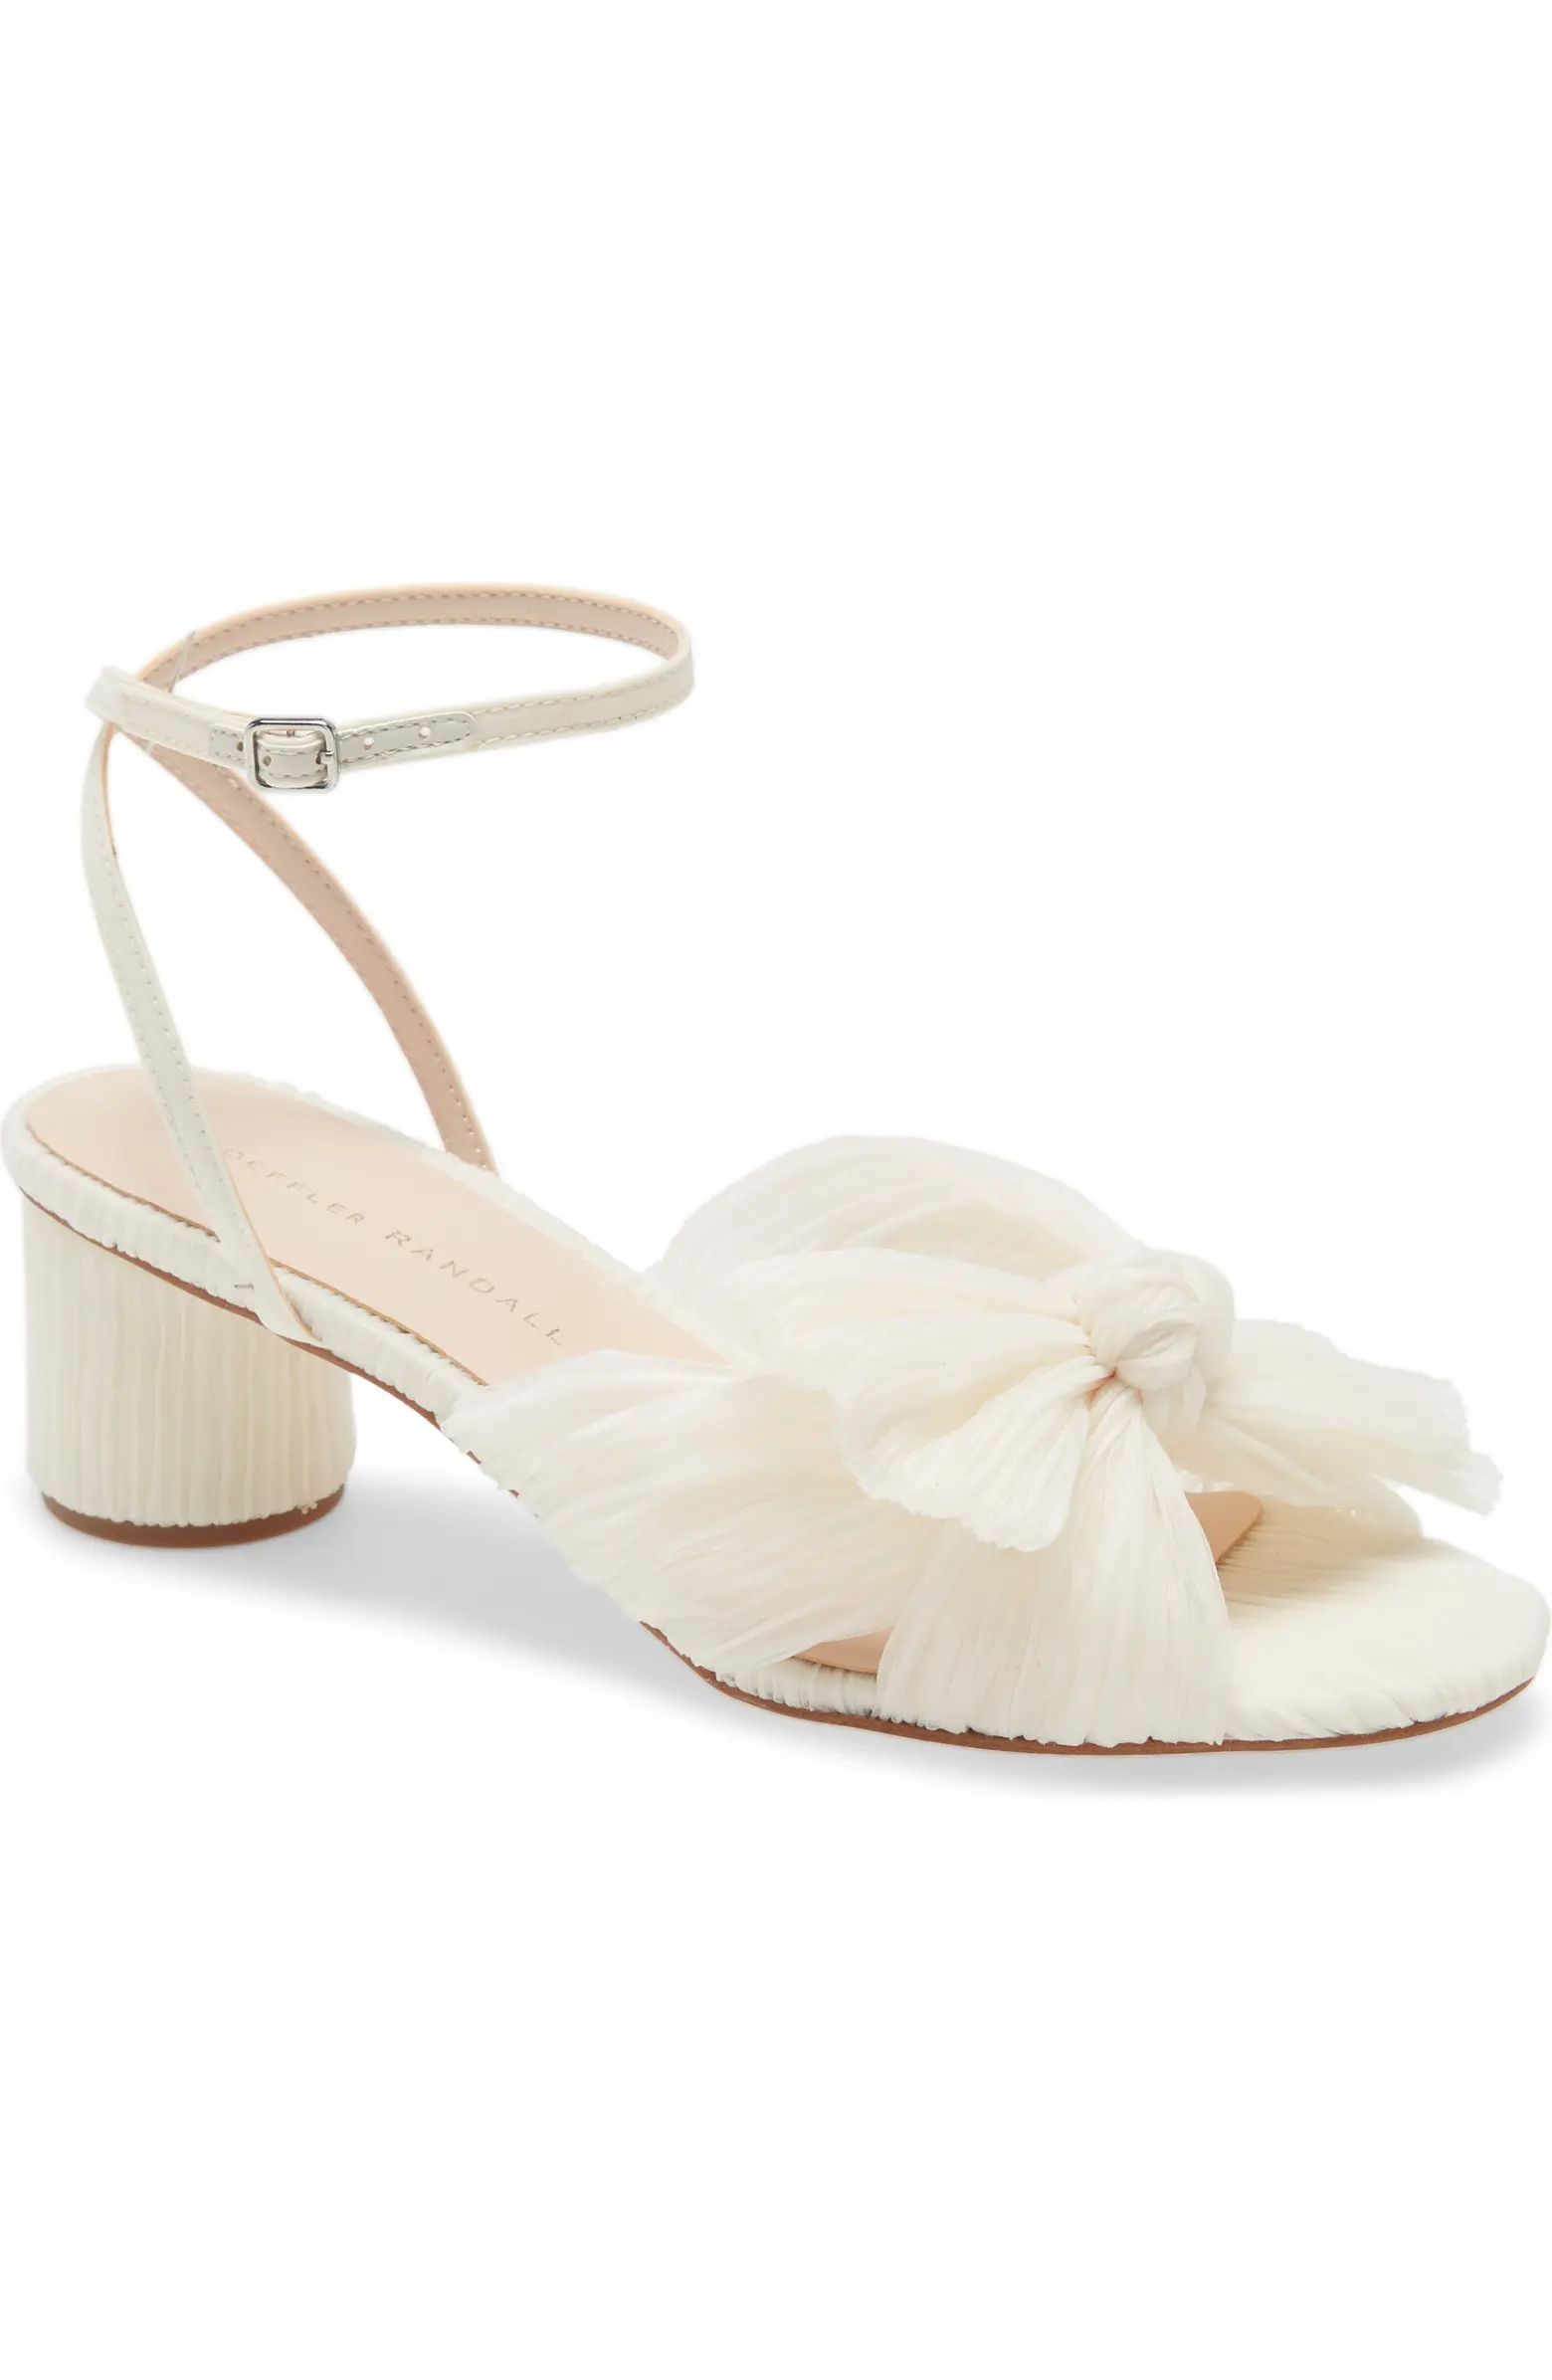 Dahlia Ankle Strap Knotted Sandal (Women) | Nordstrom